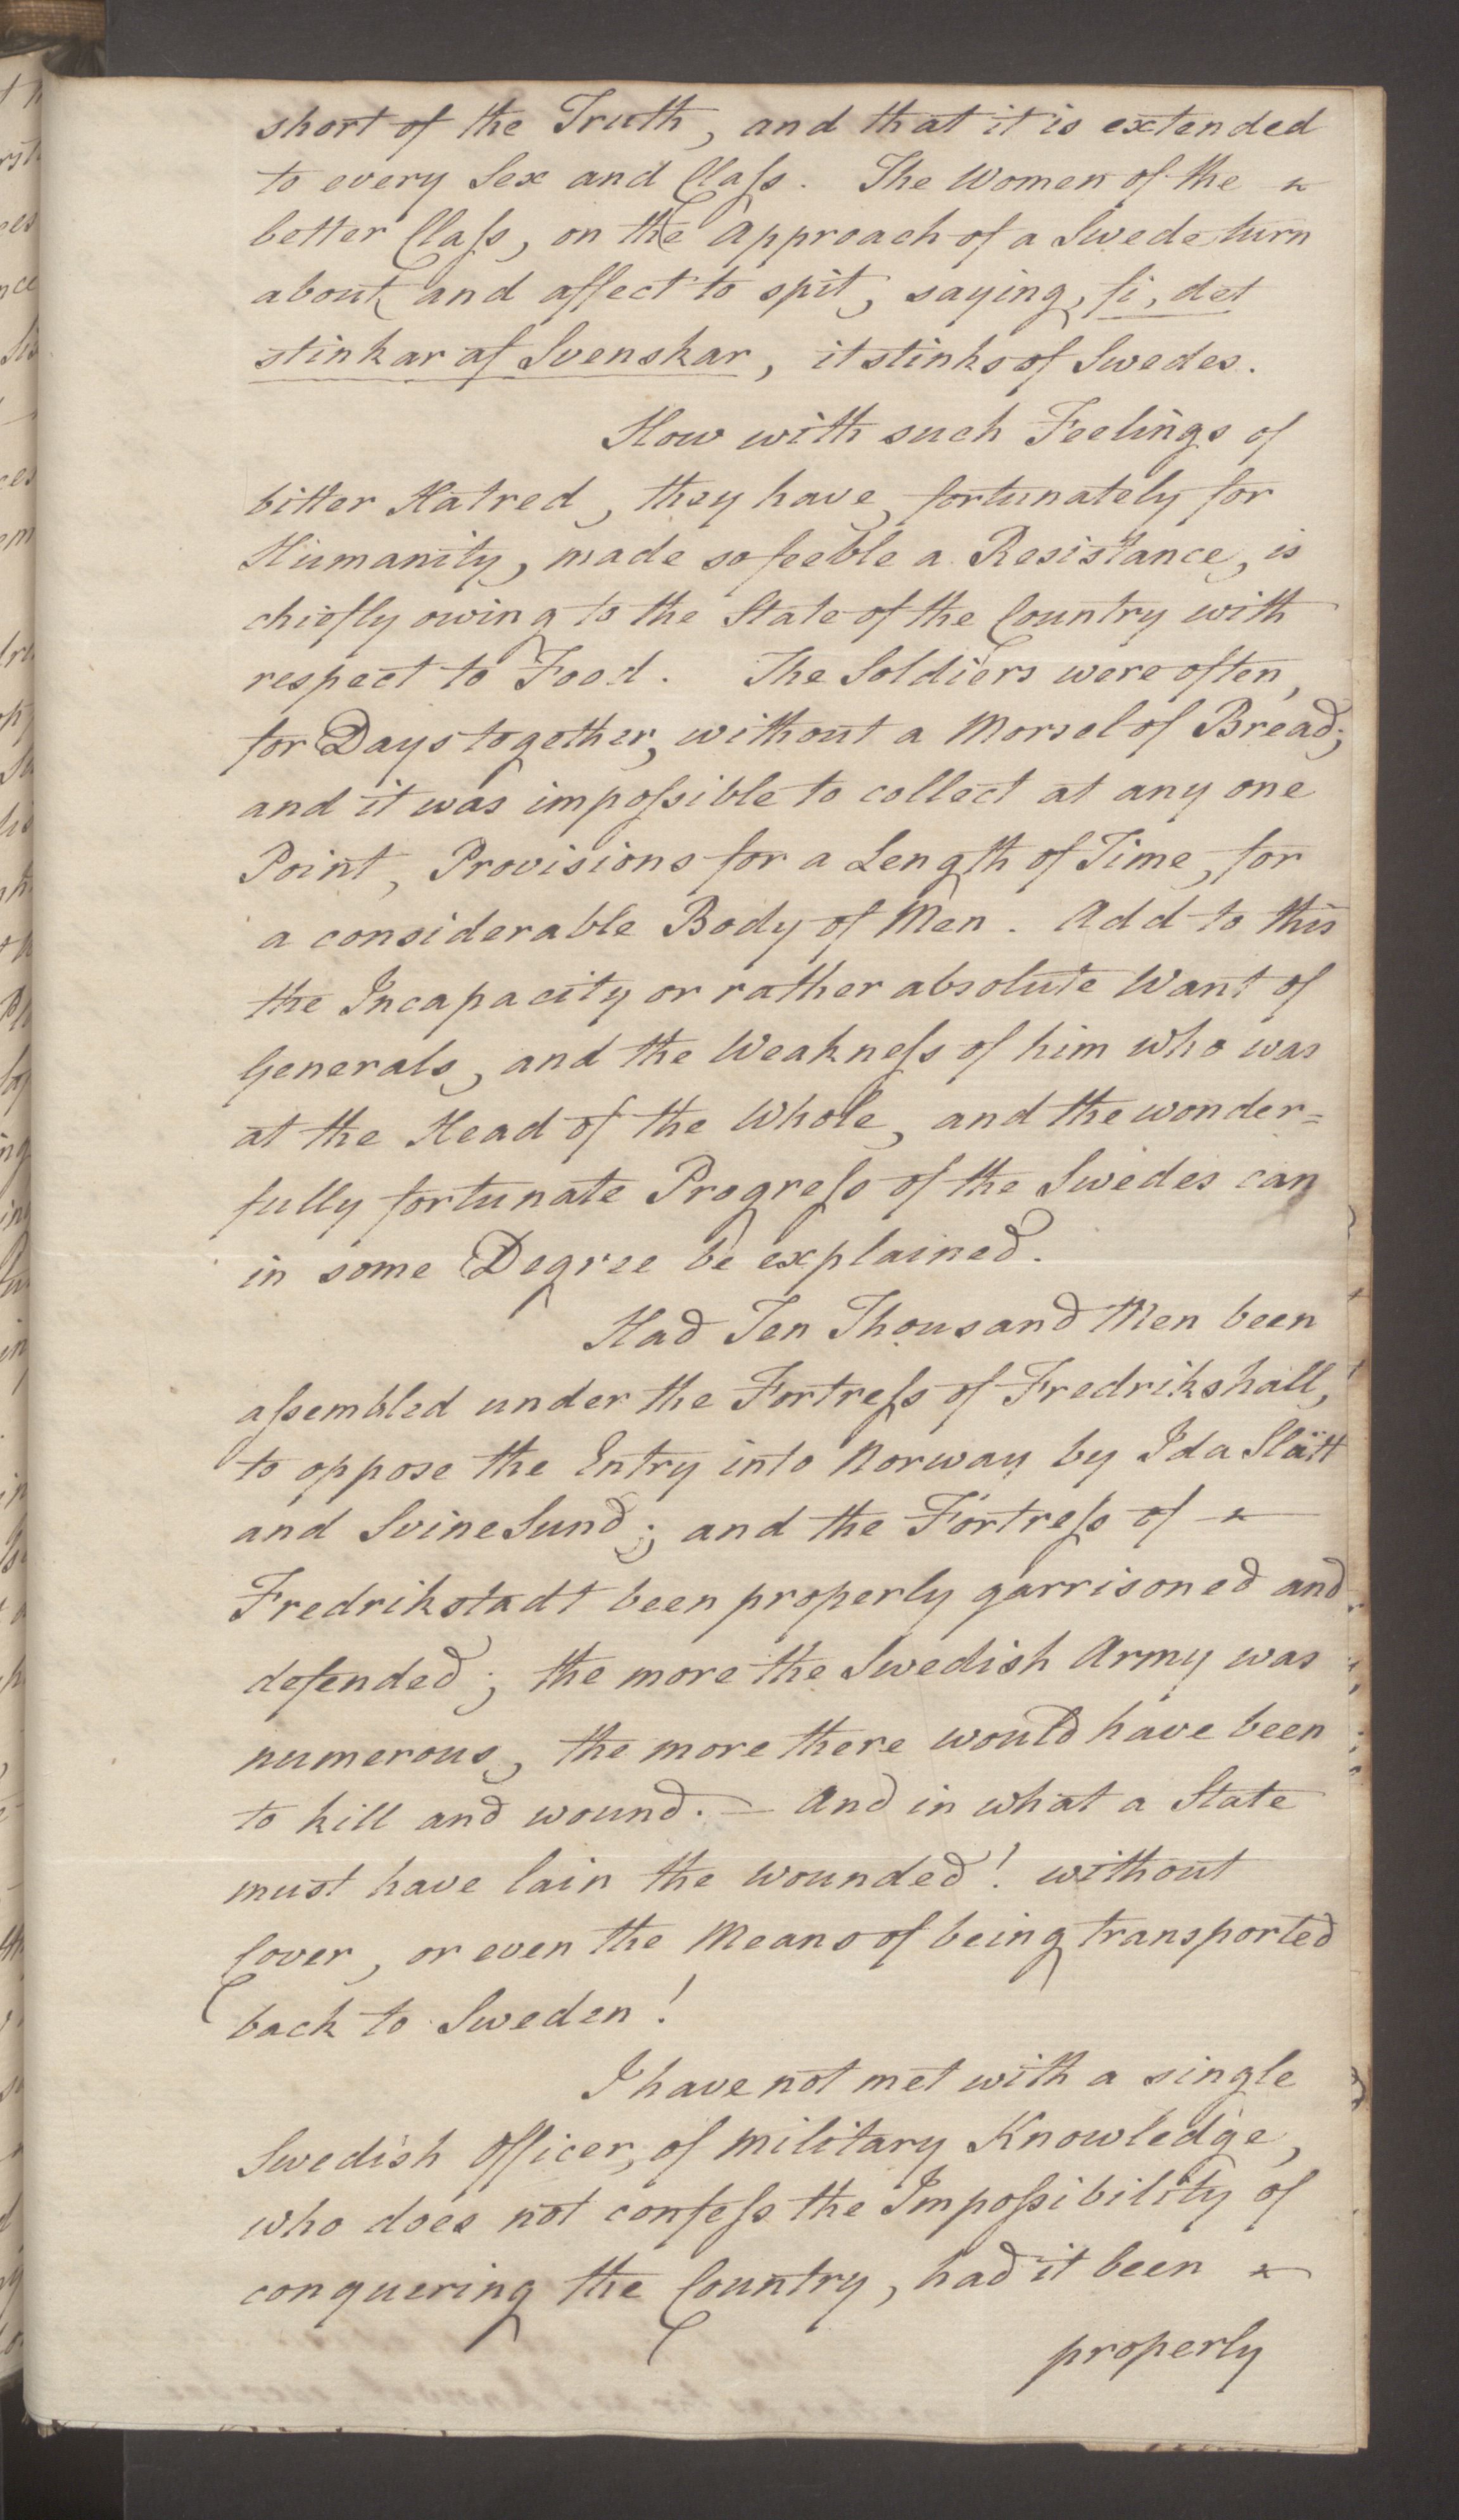 Foreign Office*, UKA/-/FO 38/16: Sir C. Gordon. Reports from Malmö, Jonkoping, and Helsingborg, 1814, s. 109